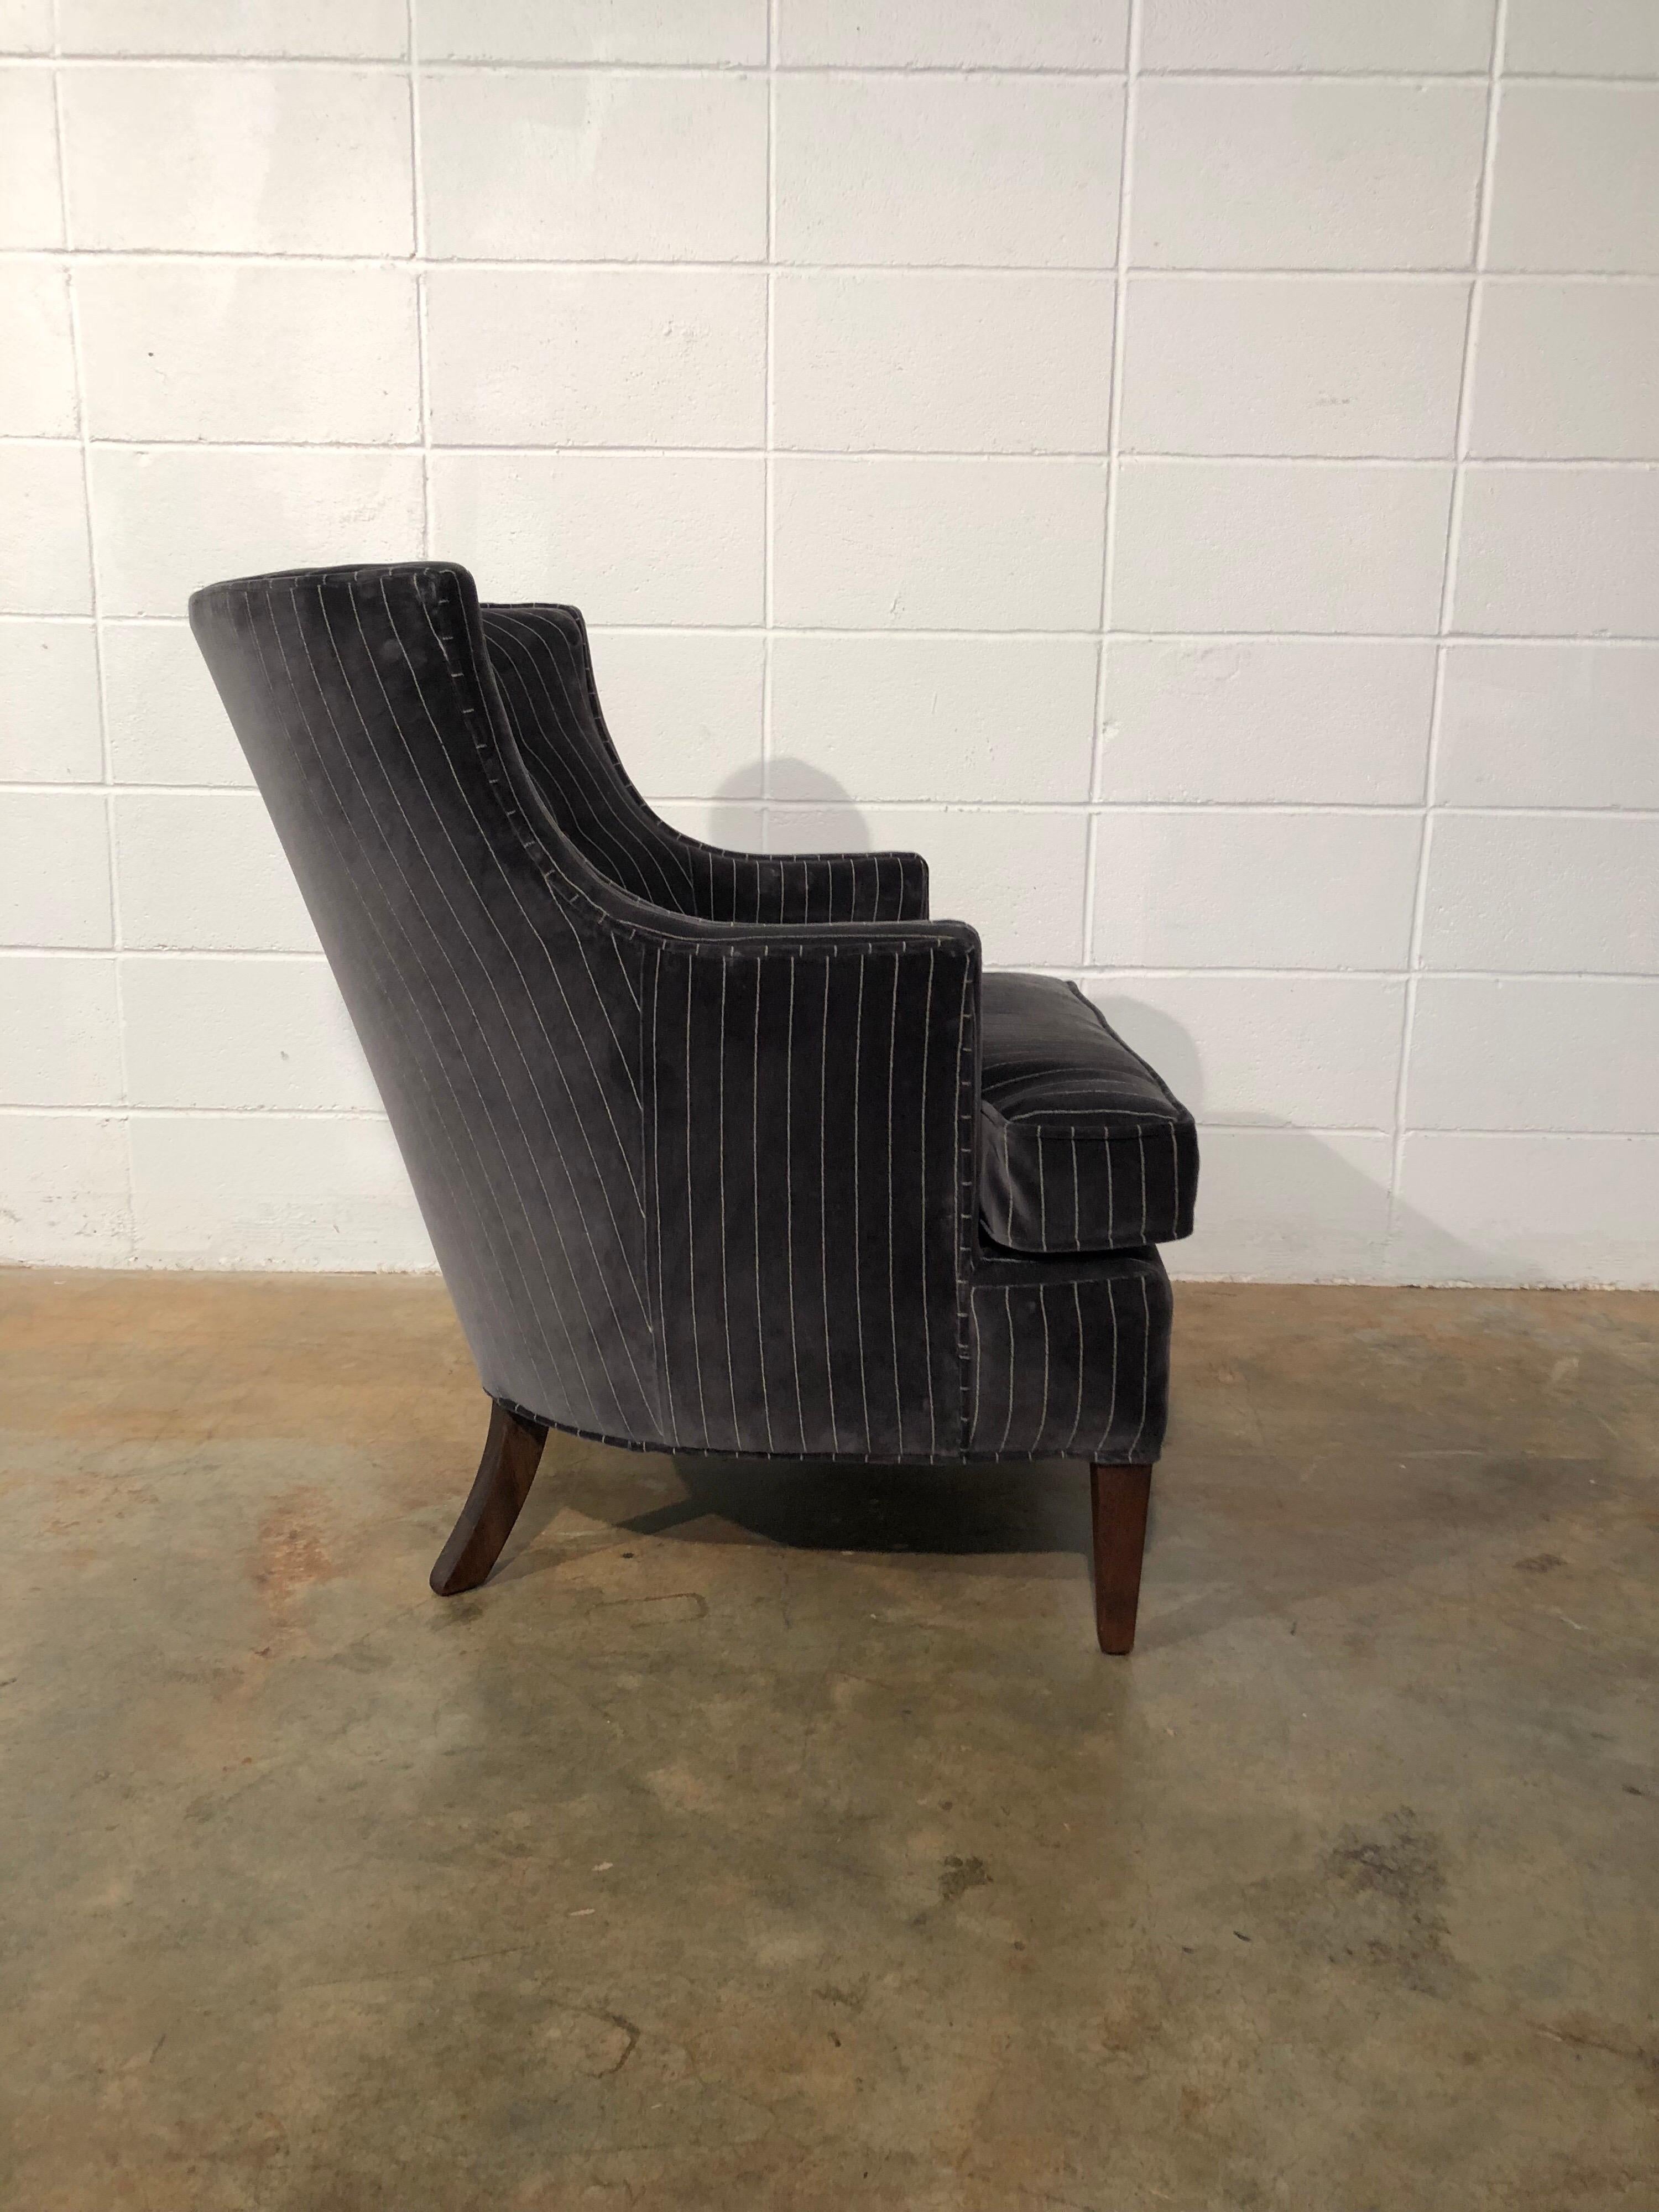 Early Chair by Edward Wormley for Dunbar, Fully Restored, Dark Gray Pinstripe In Excellent Condition For Sale In Marietta, GA